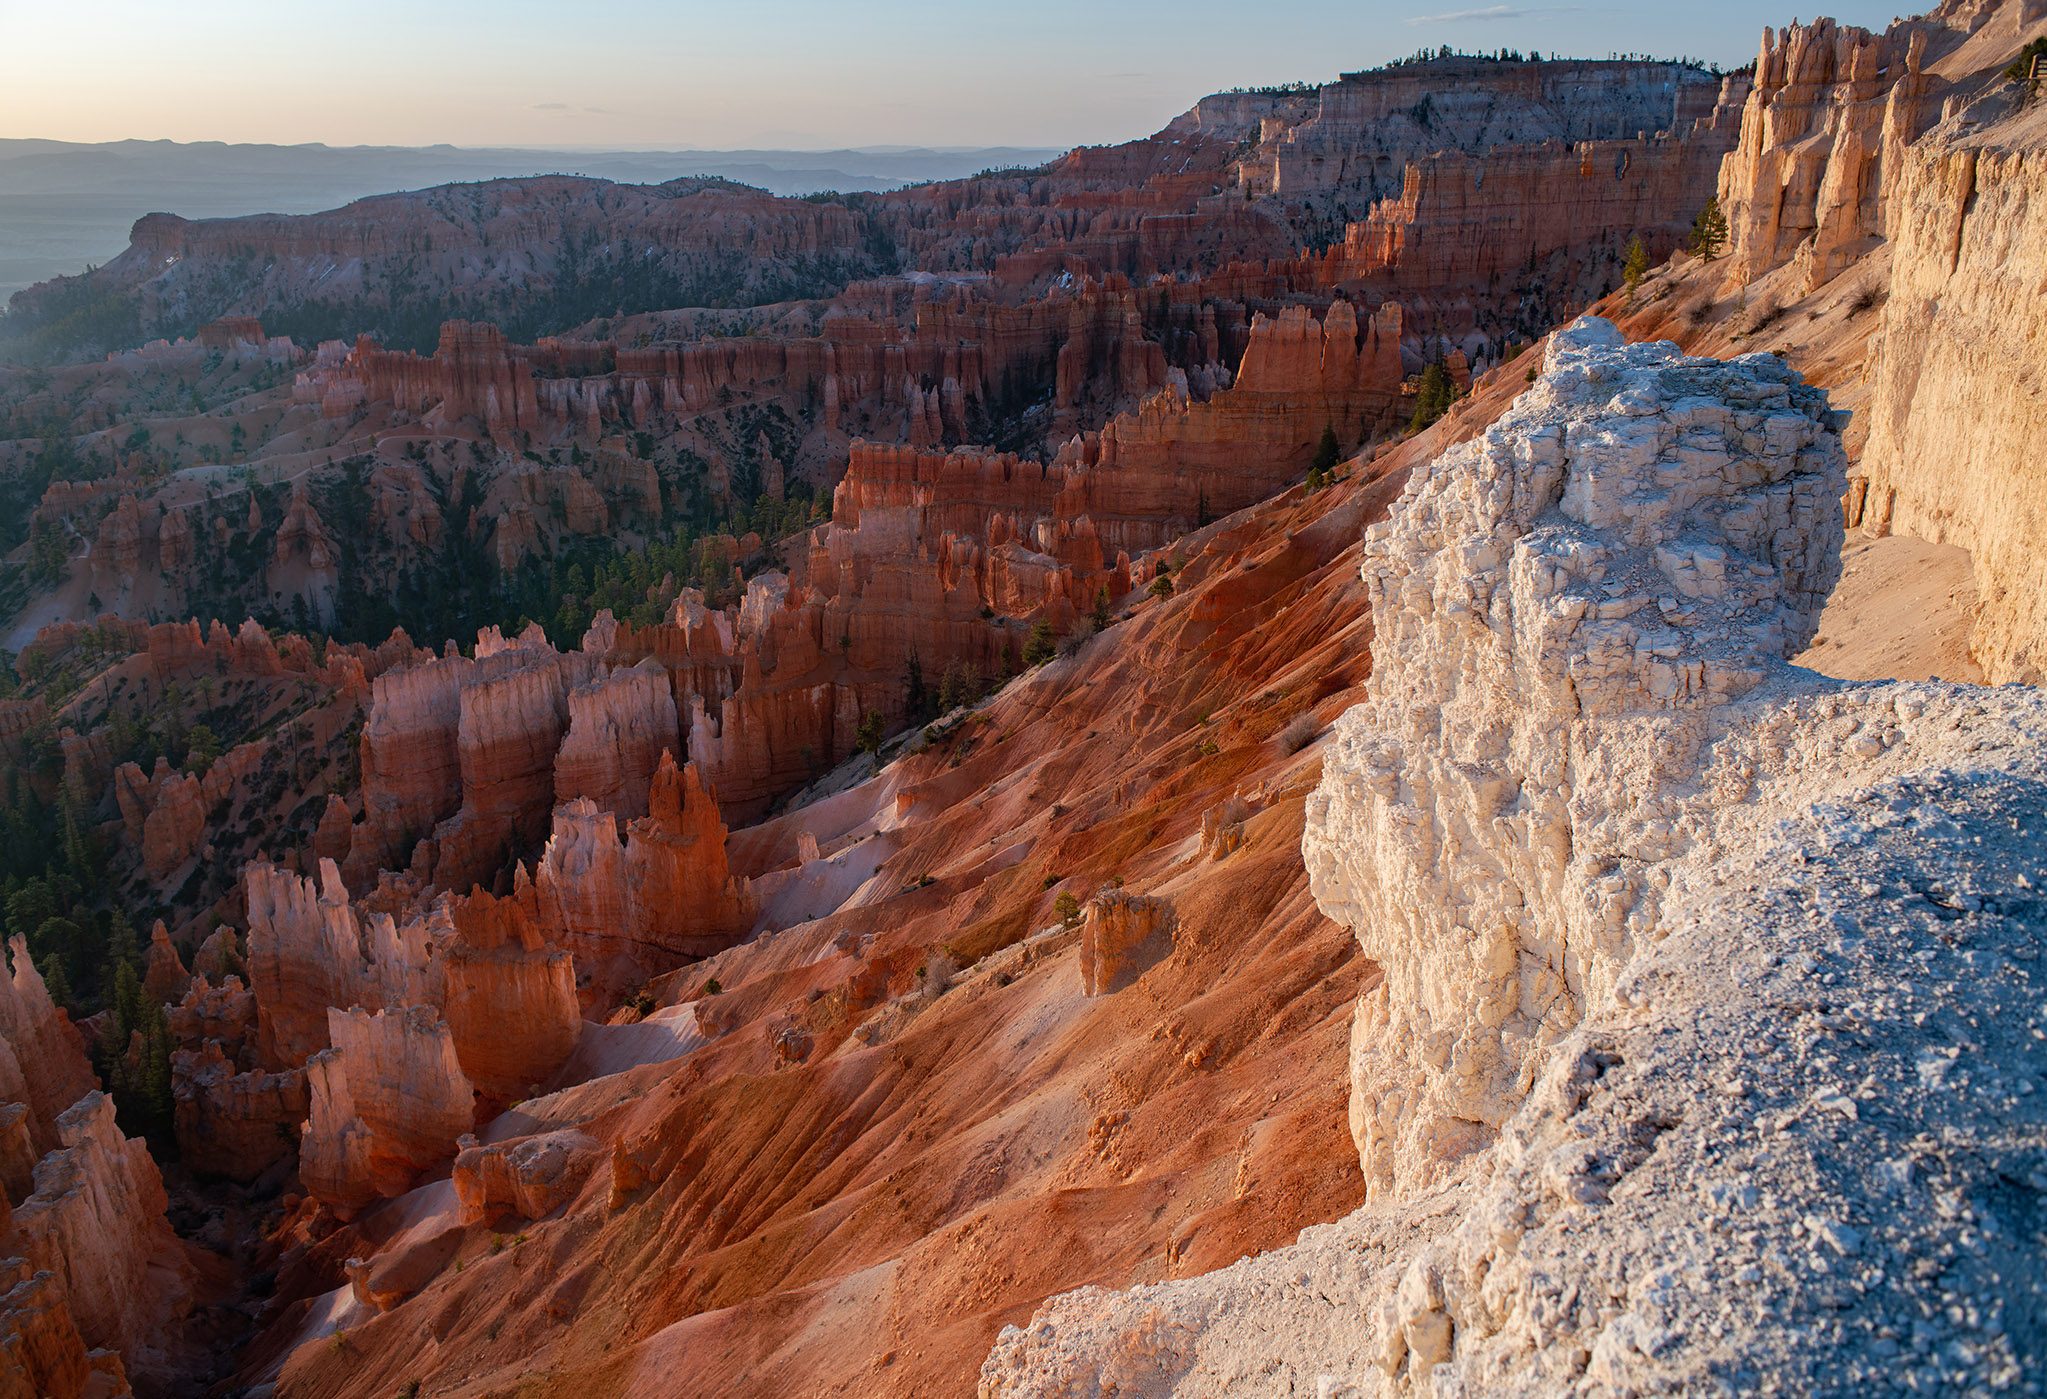 White cliffs glow above a vast landscape of red rock spires and fins.